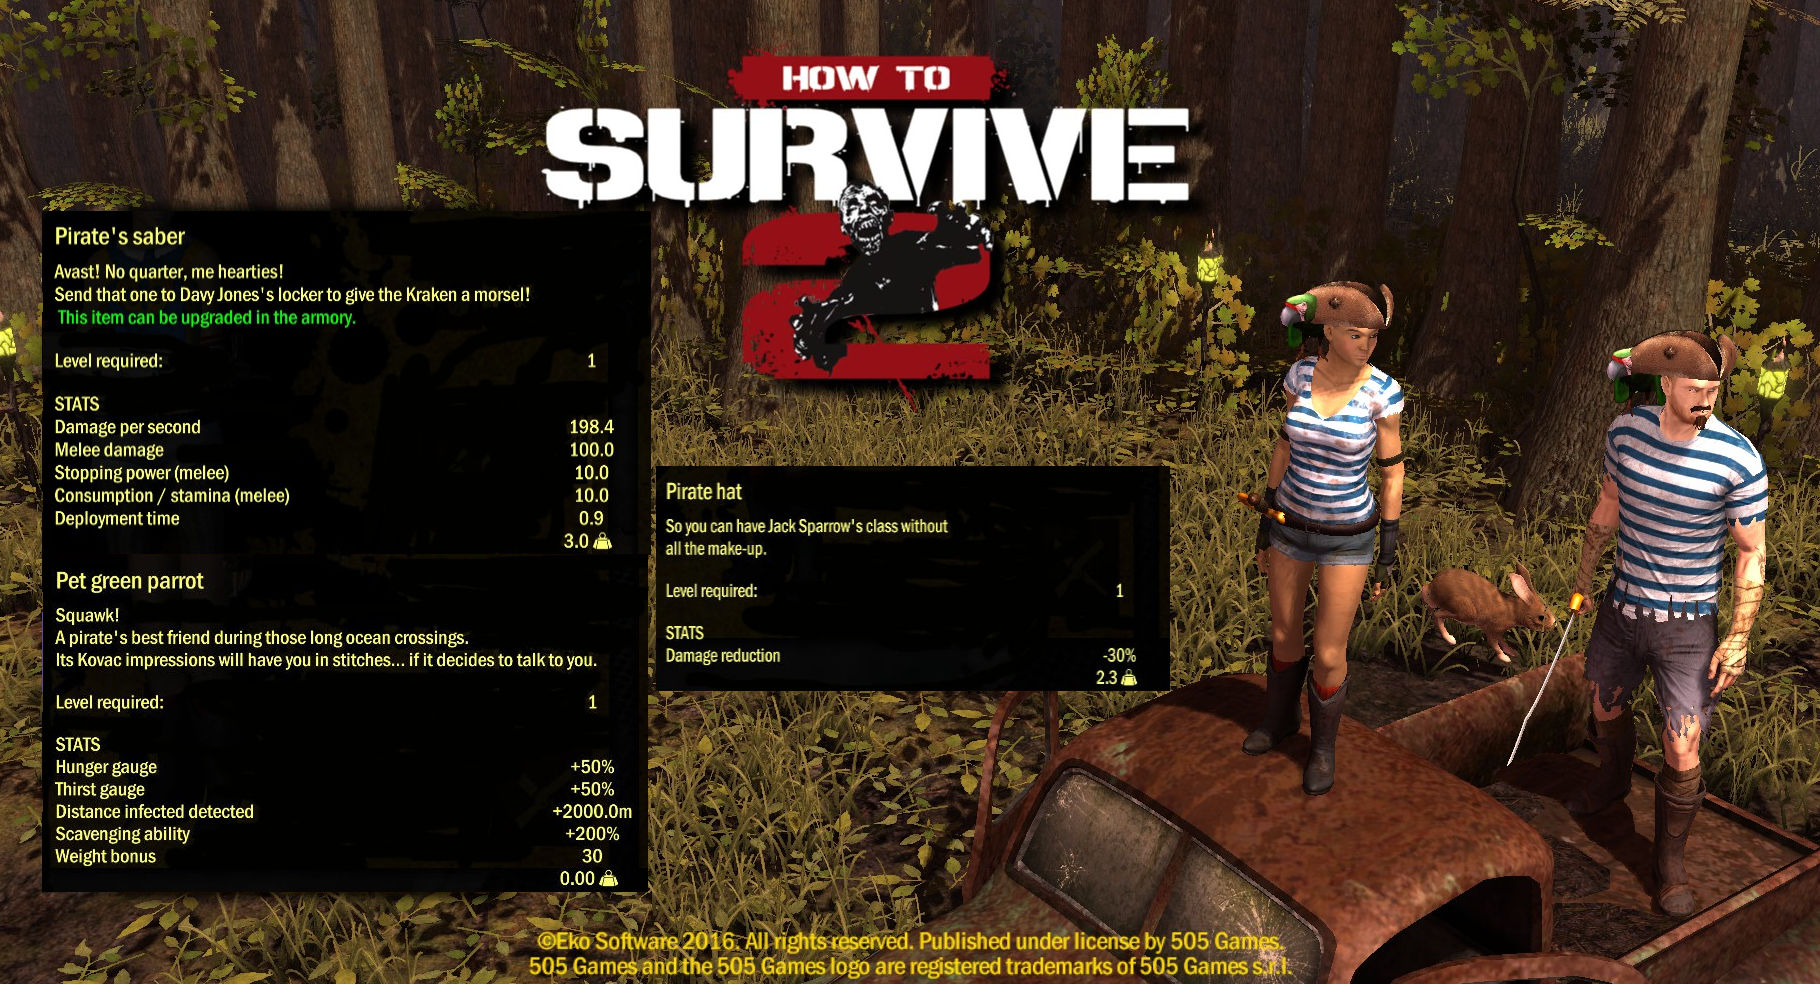 How To Survive 2 - Pirates of the Bayou Skin Pack screenshot